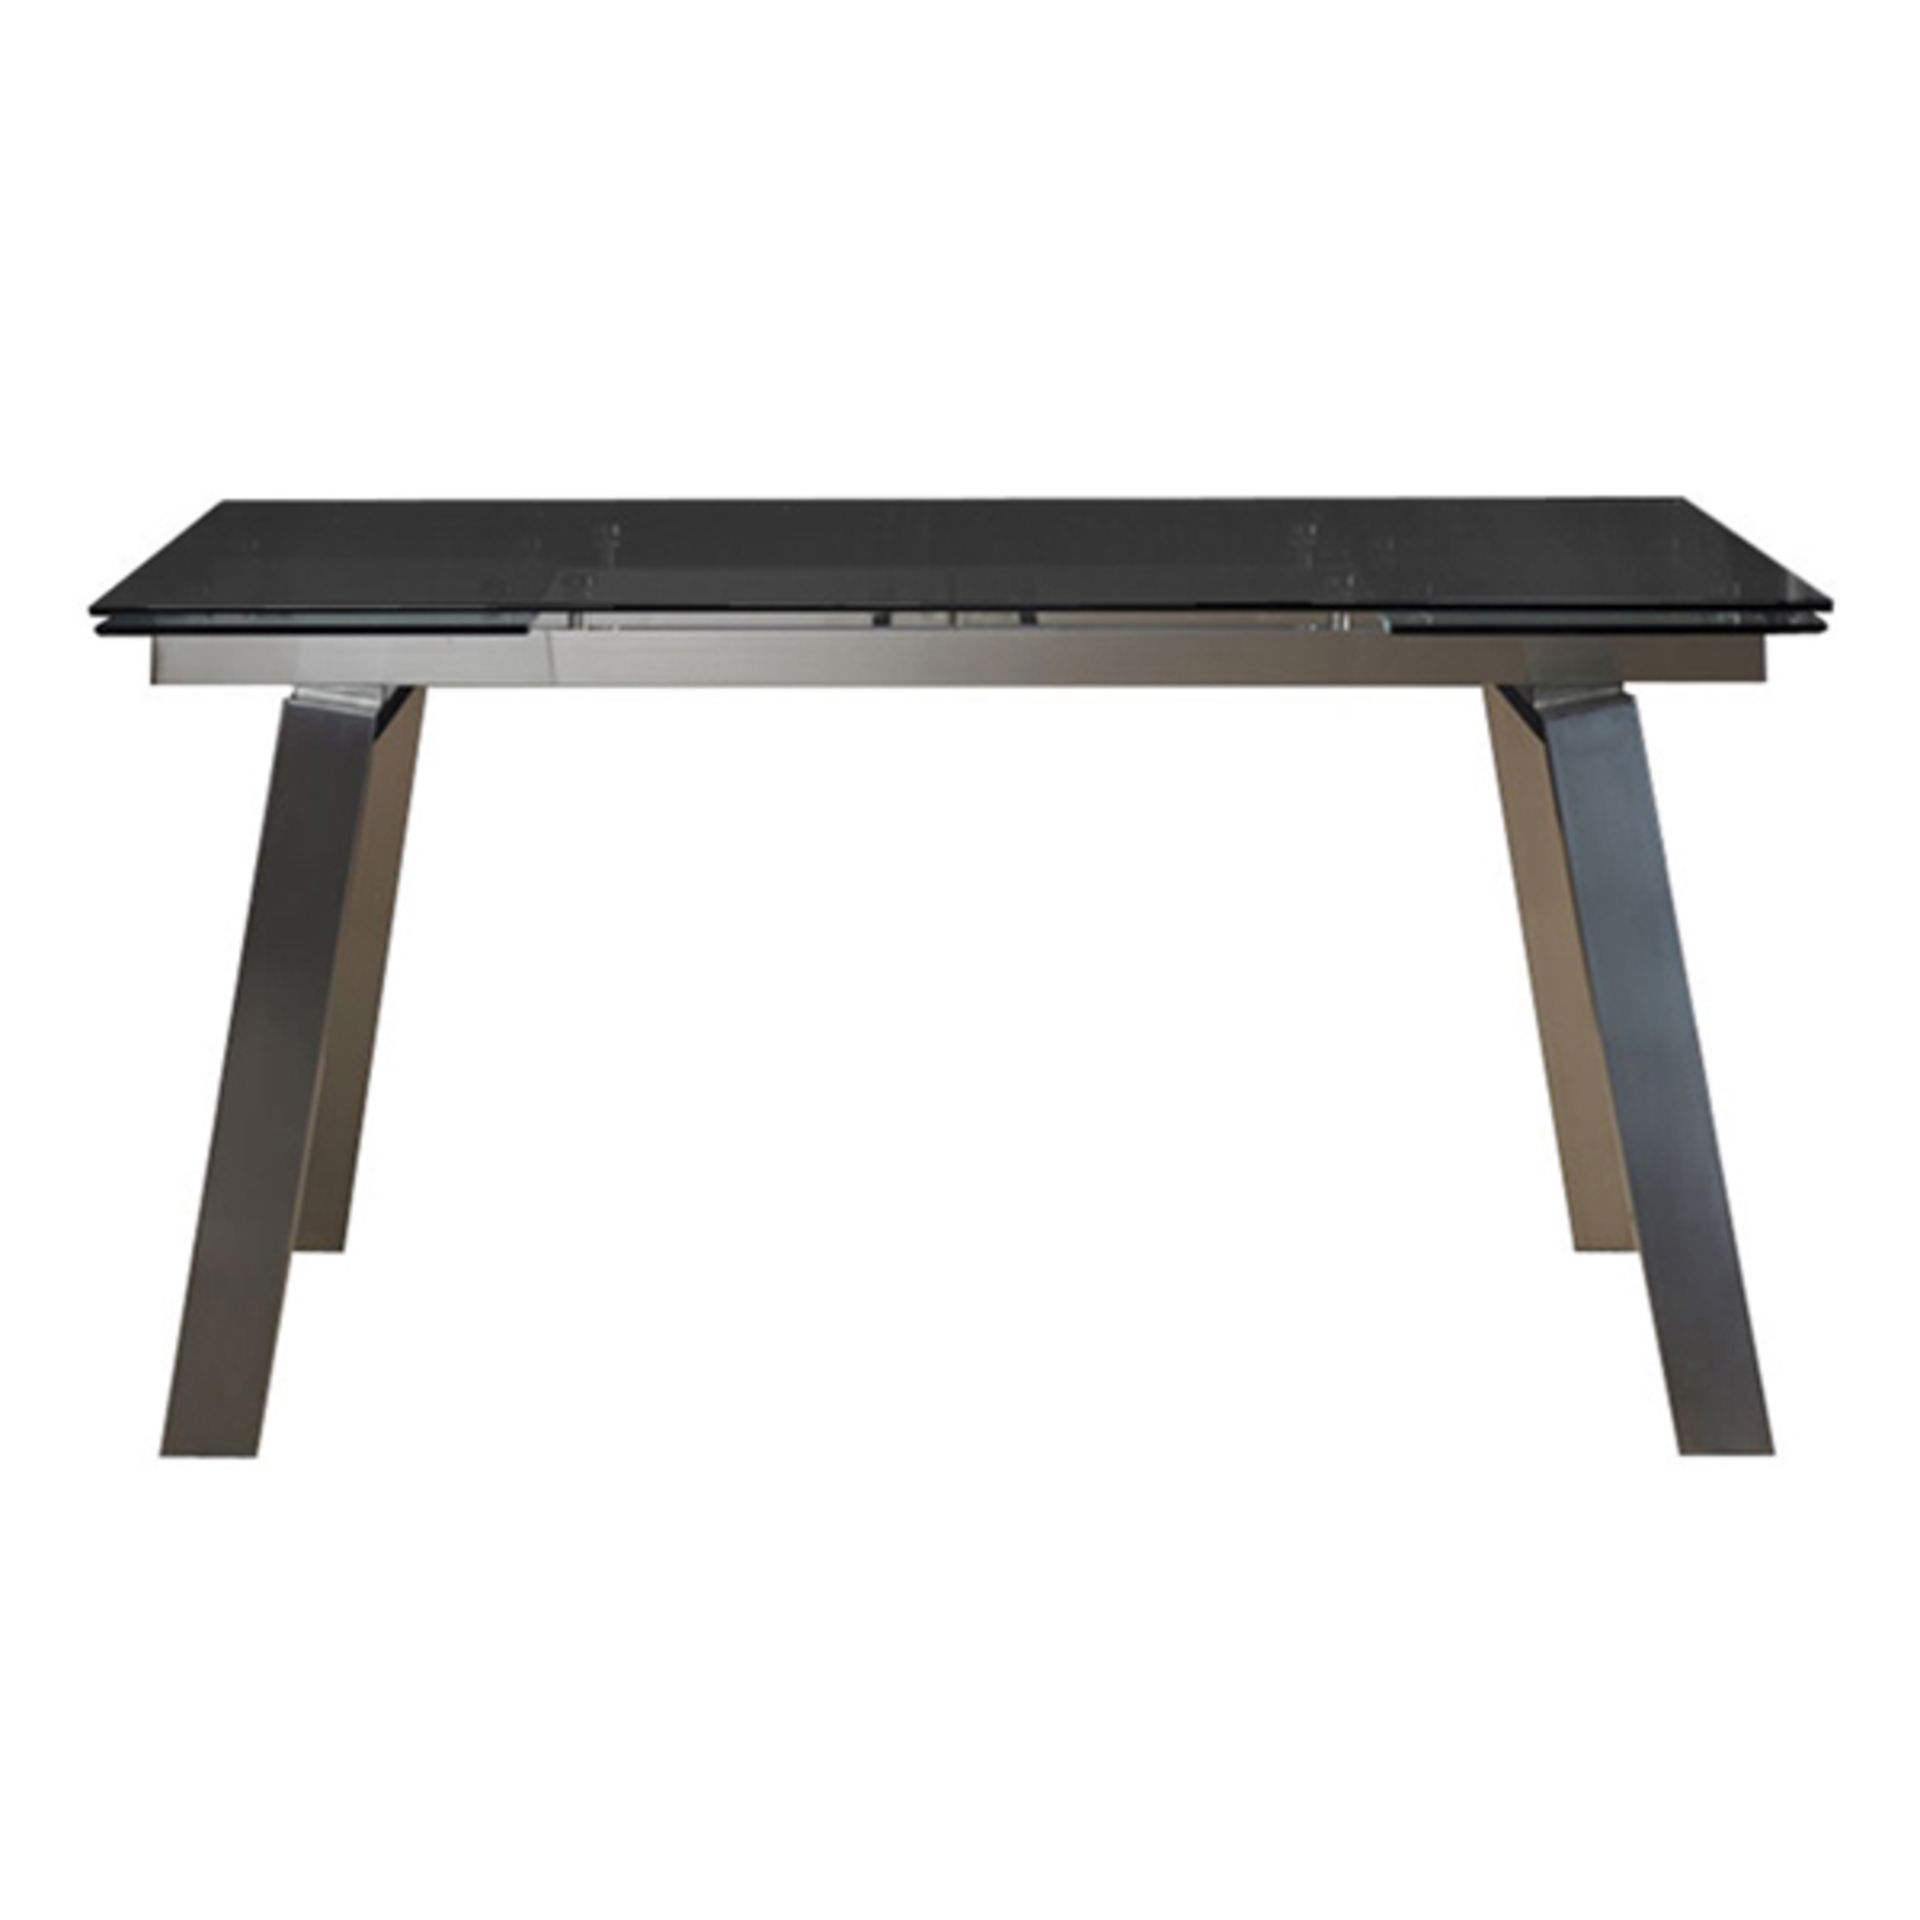 1 x Mark Webster New Genoa Extending Dining Table and Six High Back Chairs - Black Glass, Angled - Image 2 of 4